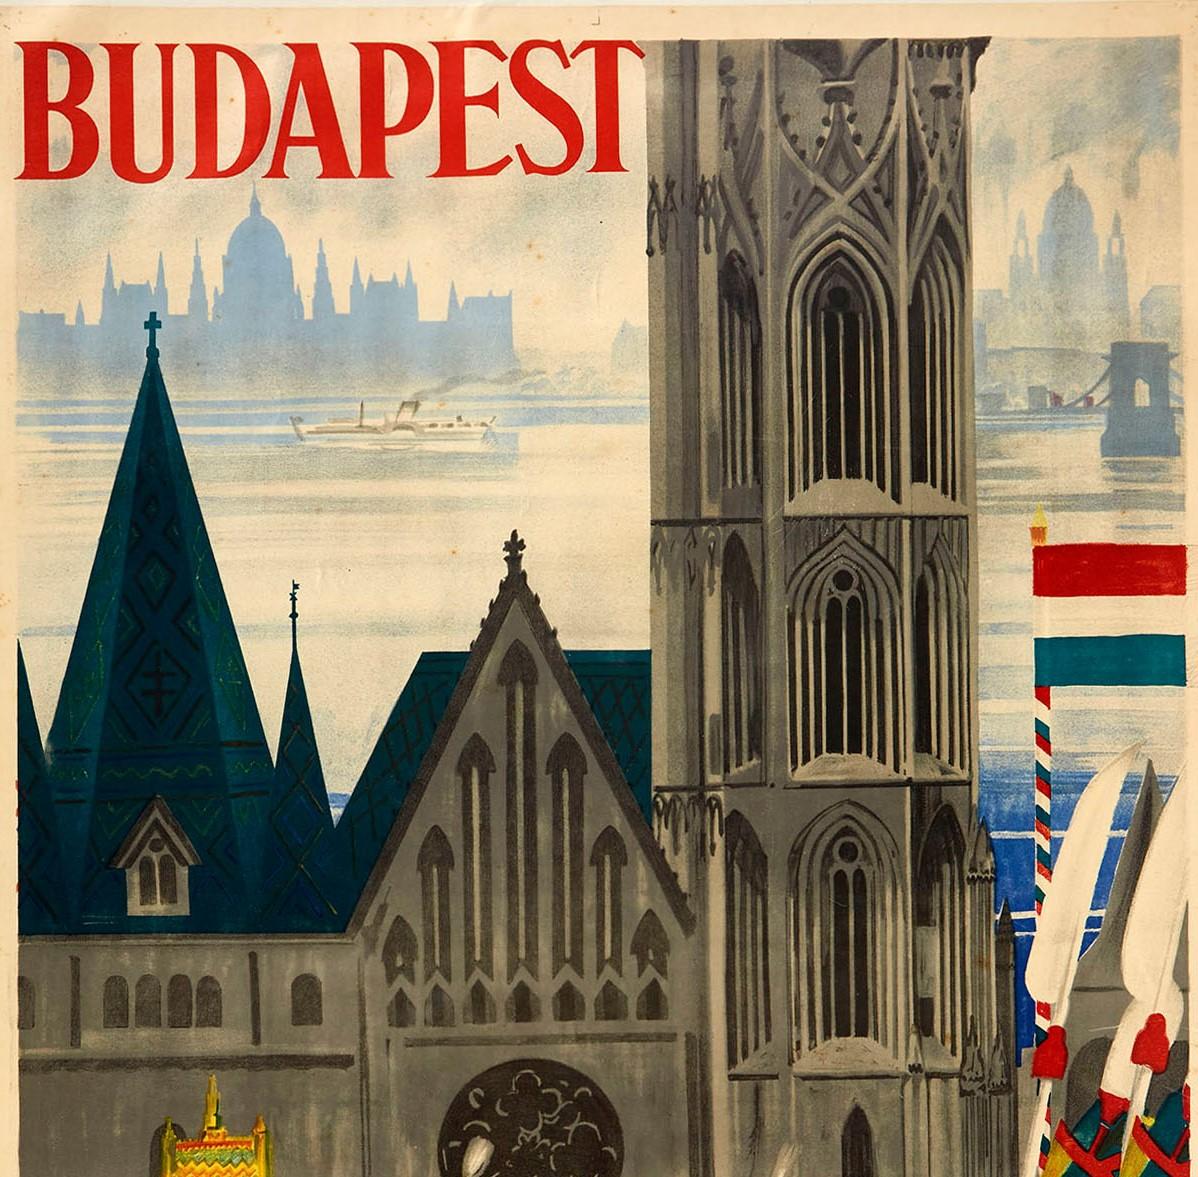 Original vintage travel poster for Budapest featuring a great illustration by Jeges Erno (1898-1956) depicting a festival procession of people in traditional dress walking past the historic 11th century Matthias Church on Holy Trinity Square with a